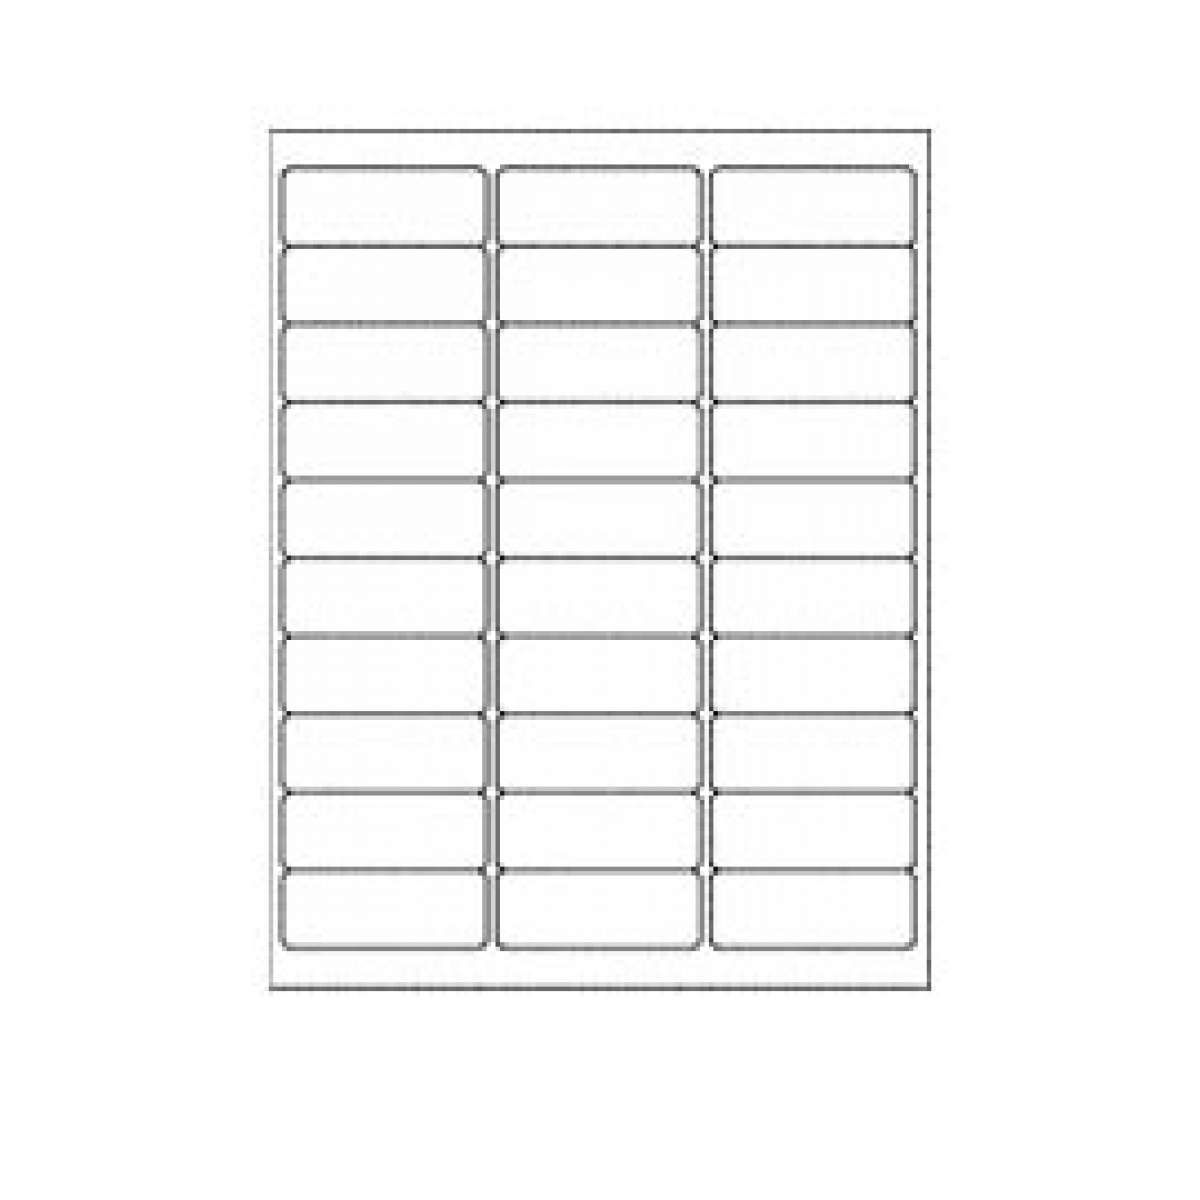 Box of Labels (100 sheets) - 3 x 10 Adhesive / Removable Labels (30 labels per page)